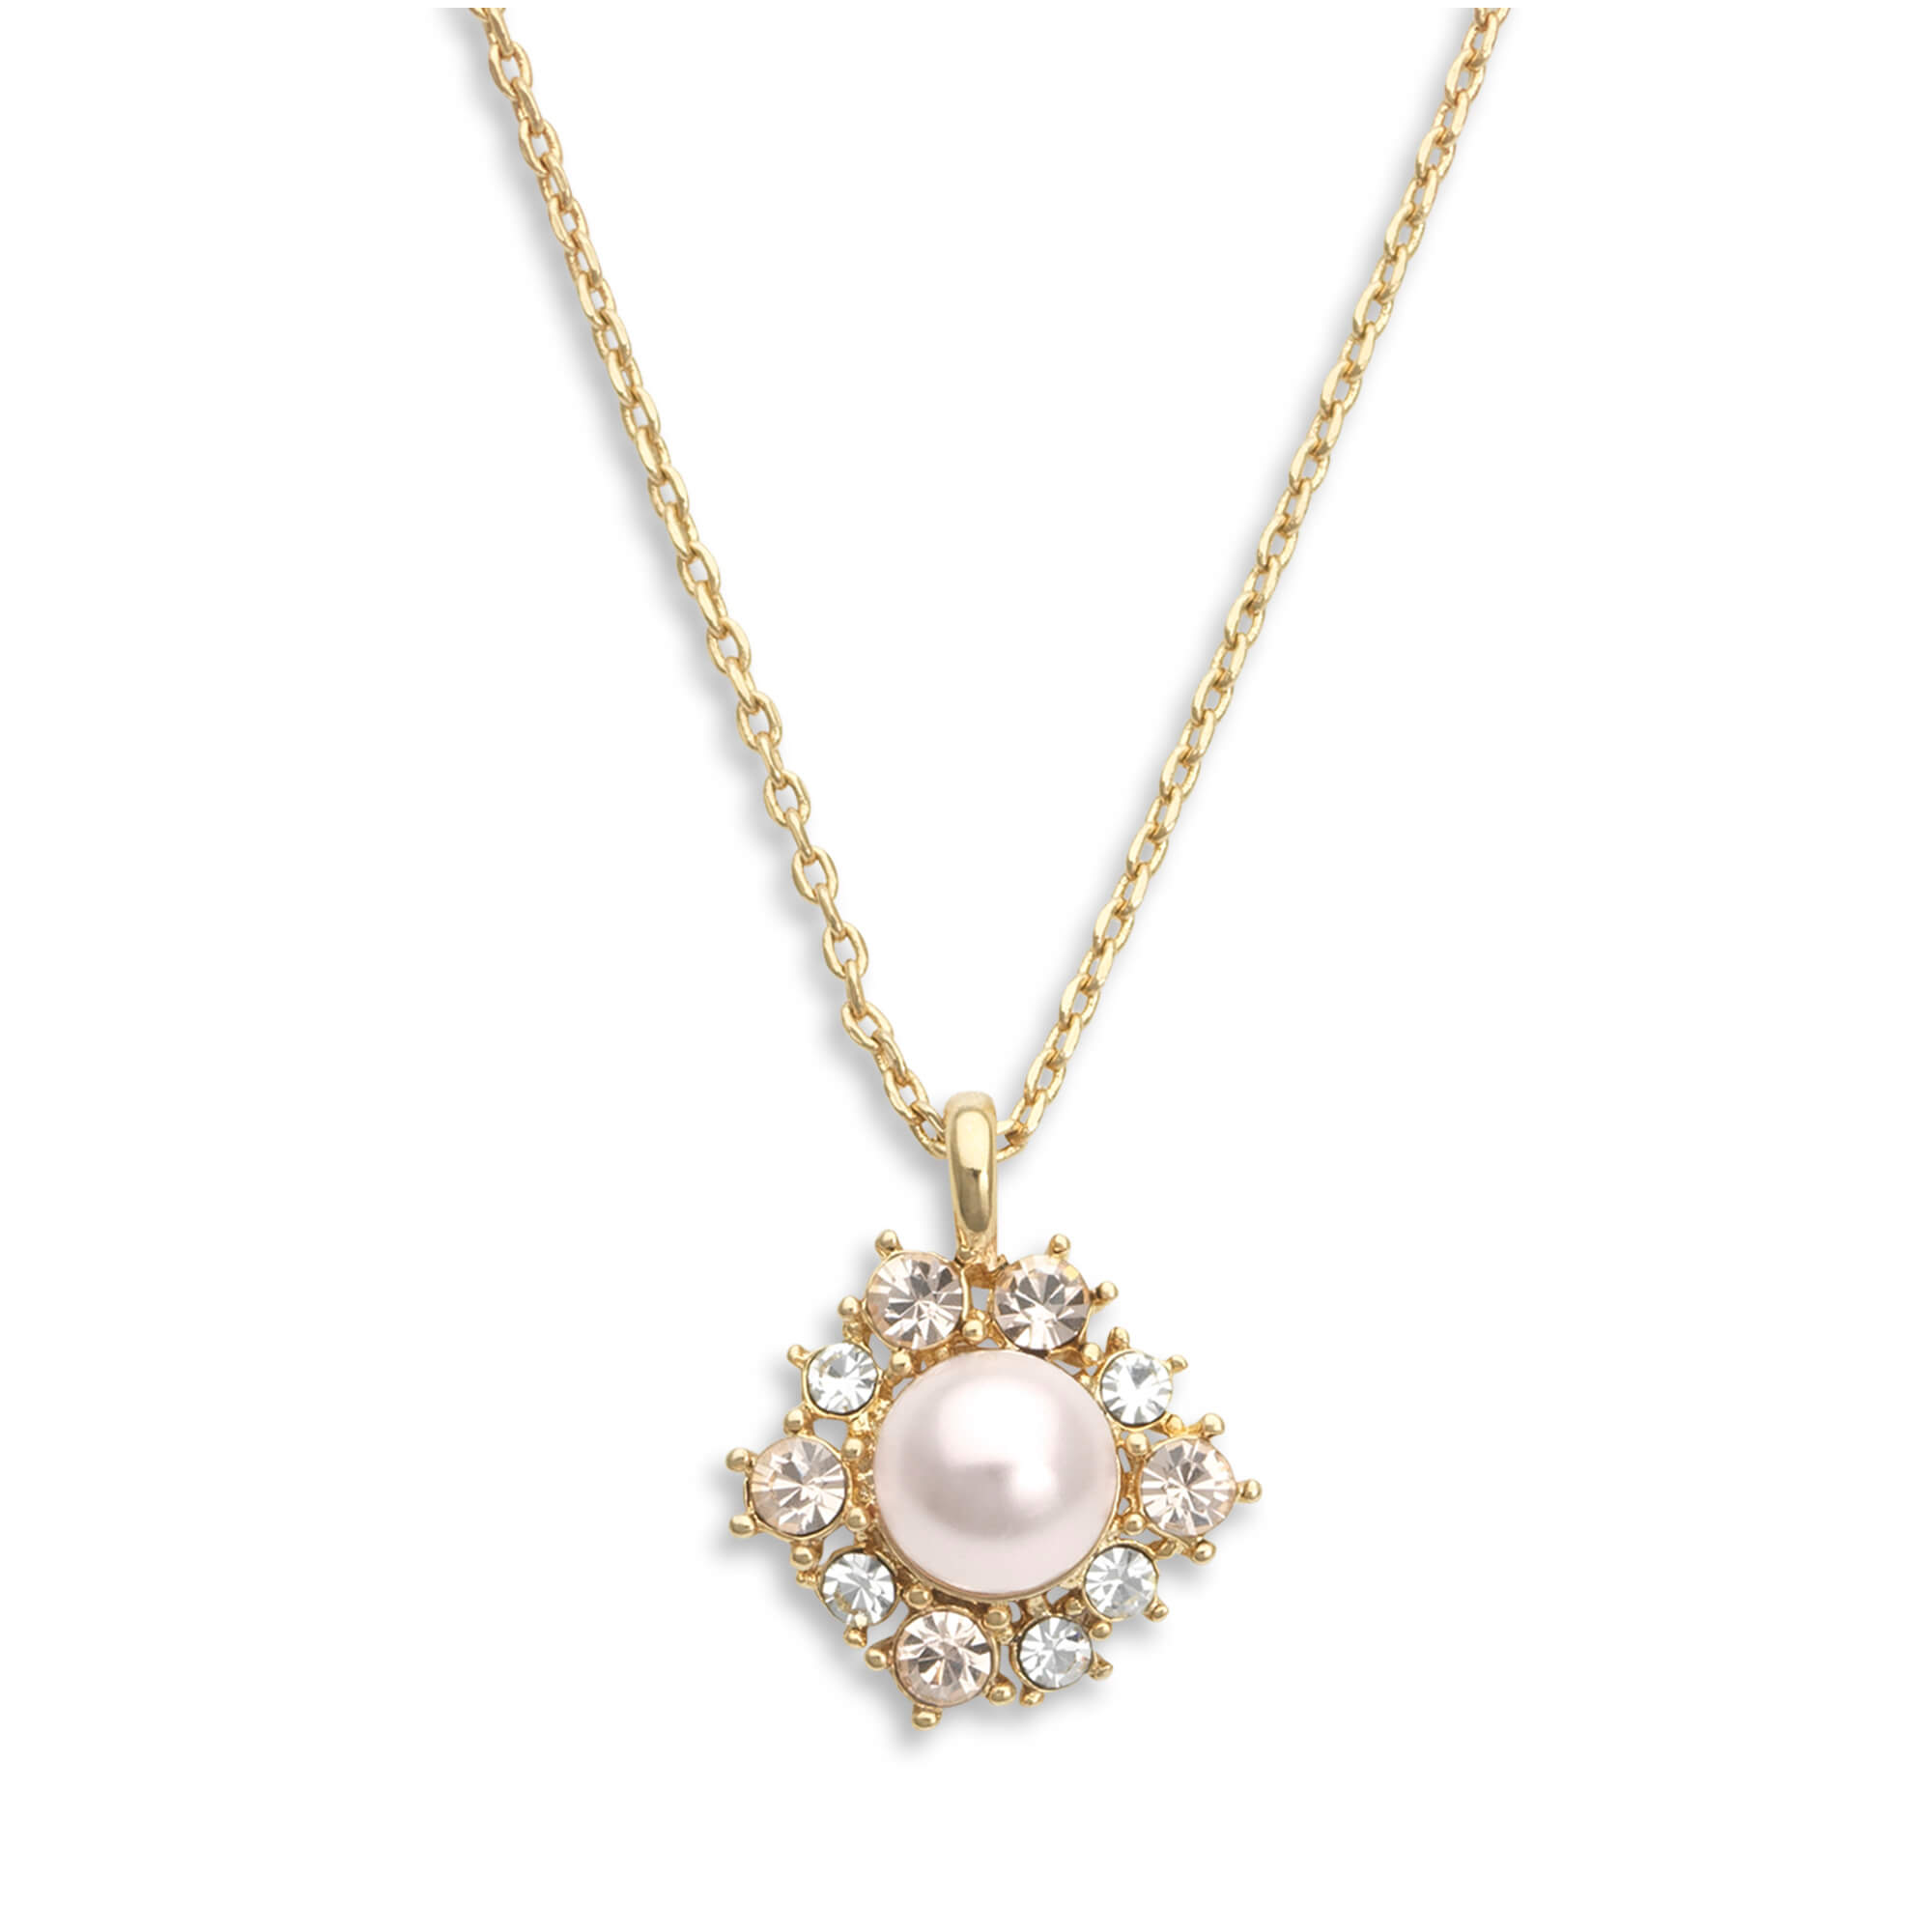 Emily pearl necklace - Rosaline - Lily and Rose Europe